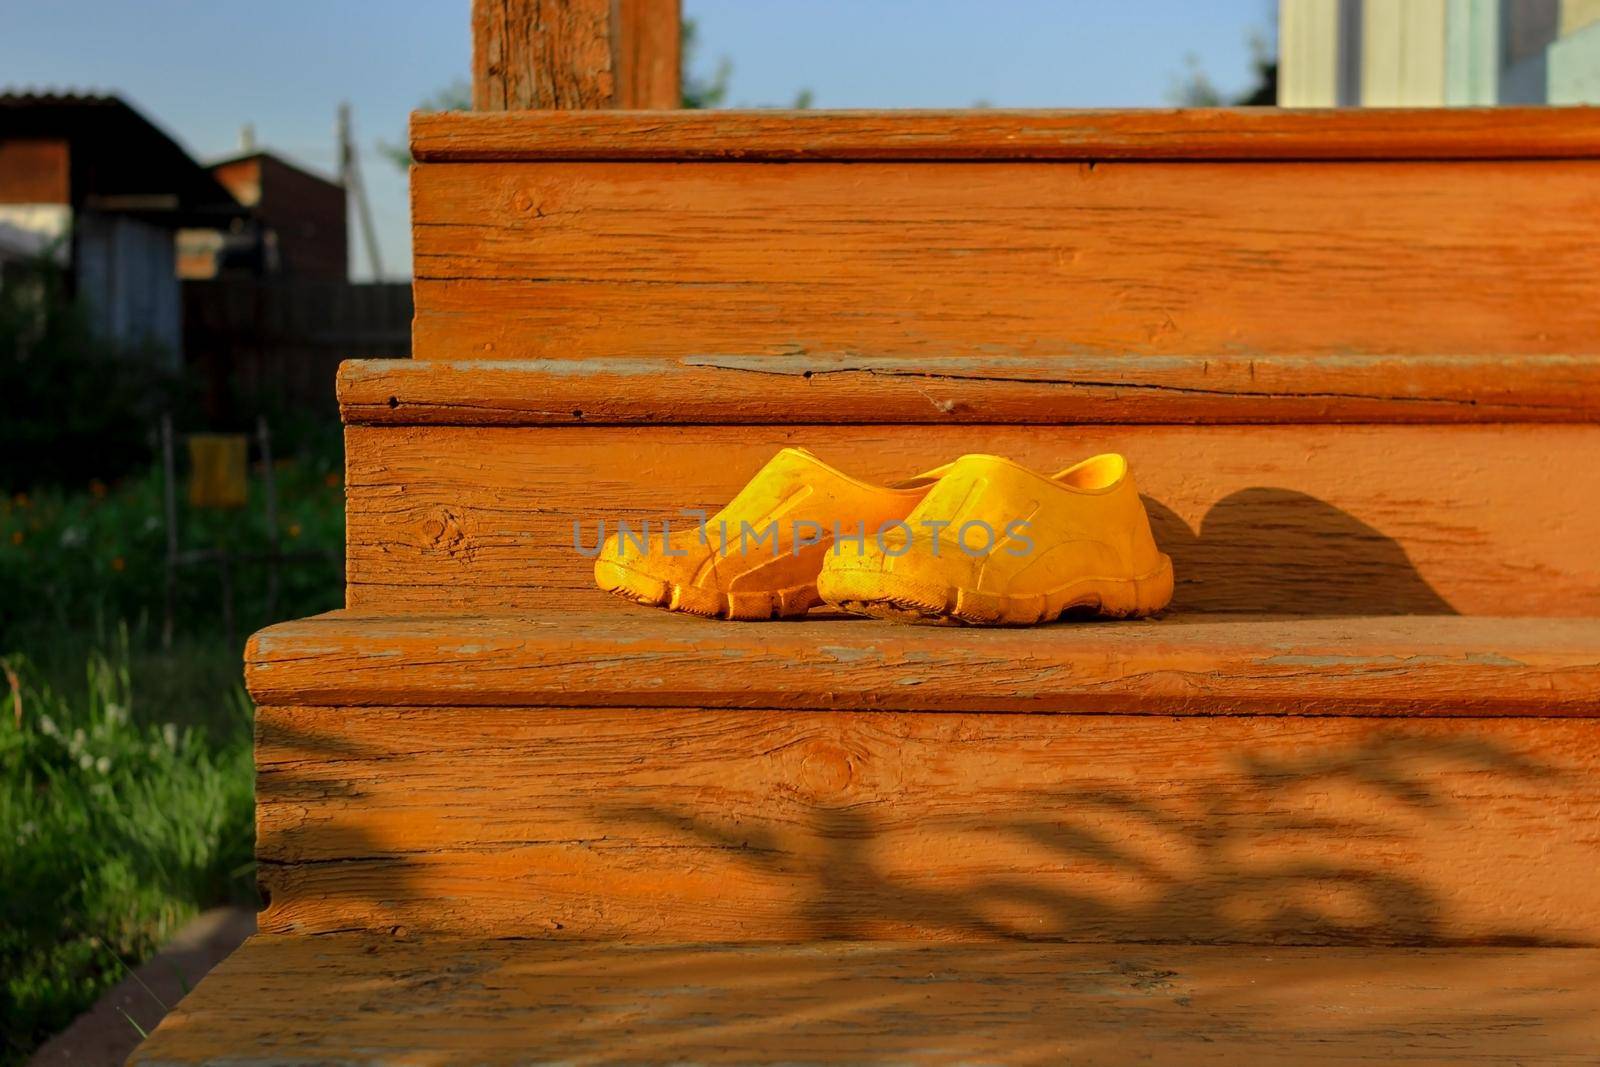 Yellow rubber muddy work shoes on old orange stairs on summer backyard at sunset, village and countryside authentic mood, low angle